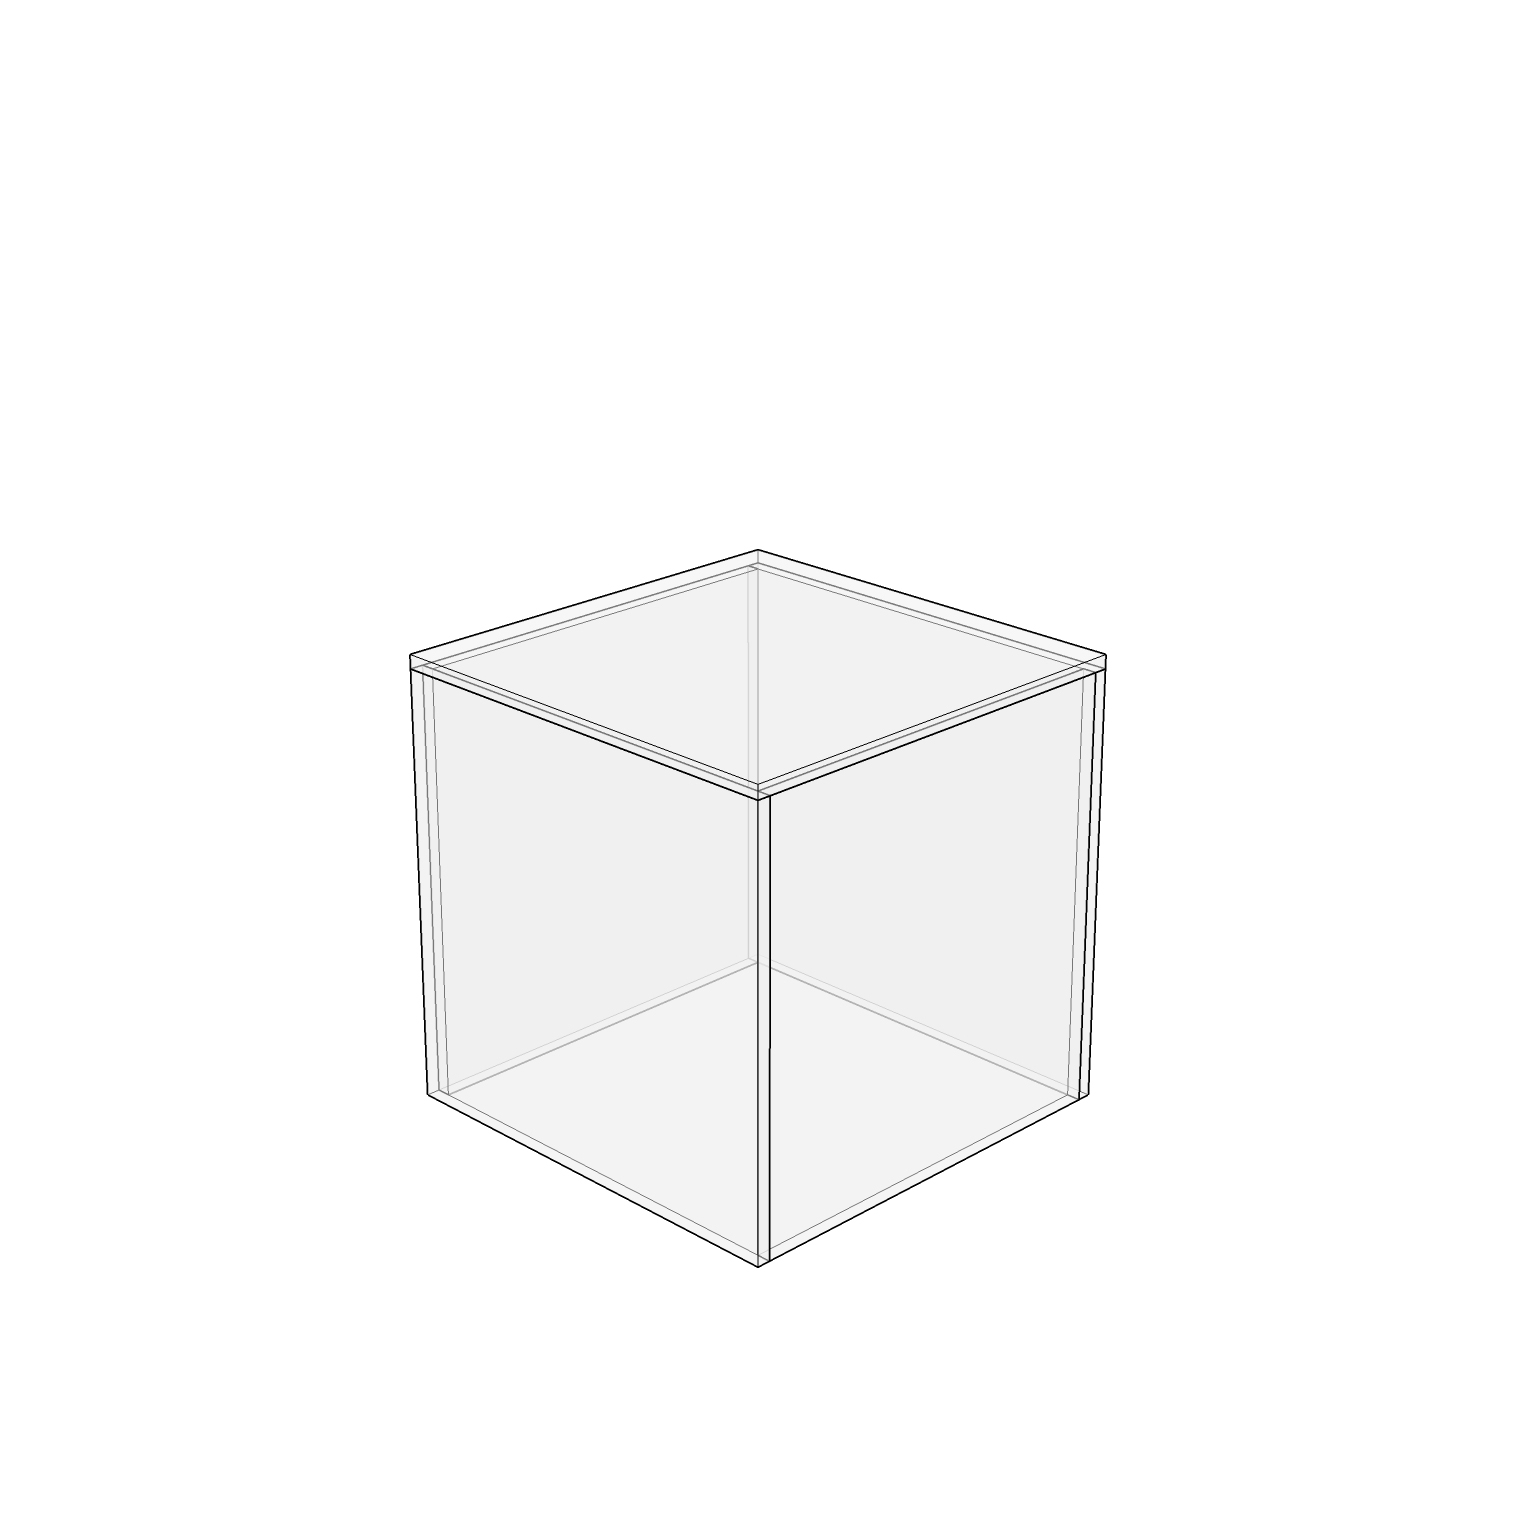 5 Sided Cube 6" Square 3/16" Thick